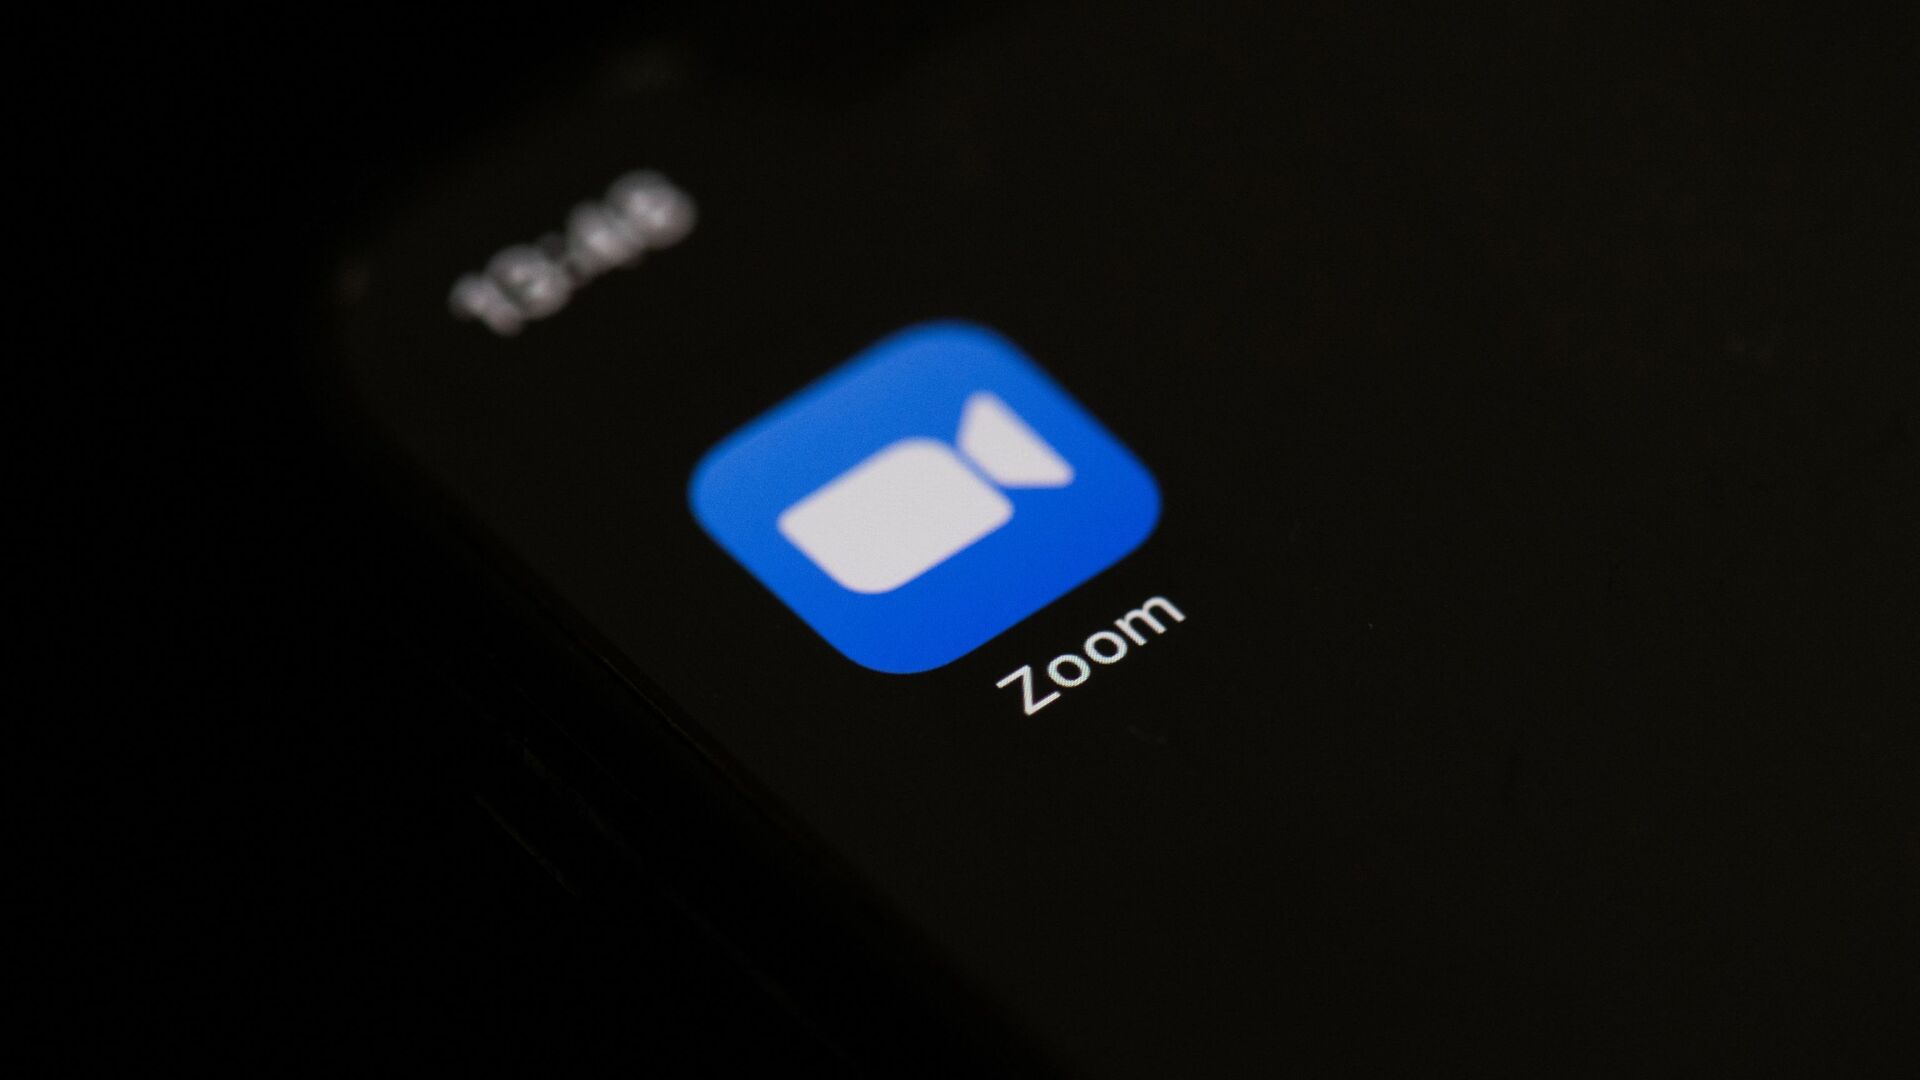 This picture taken on 27 May 2020 in Paris shows the logo of the social network  application Zoom on the screen of a phone. - Sputnik International, 1920, 23.08.2021